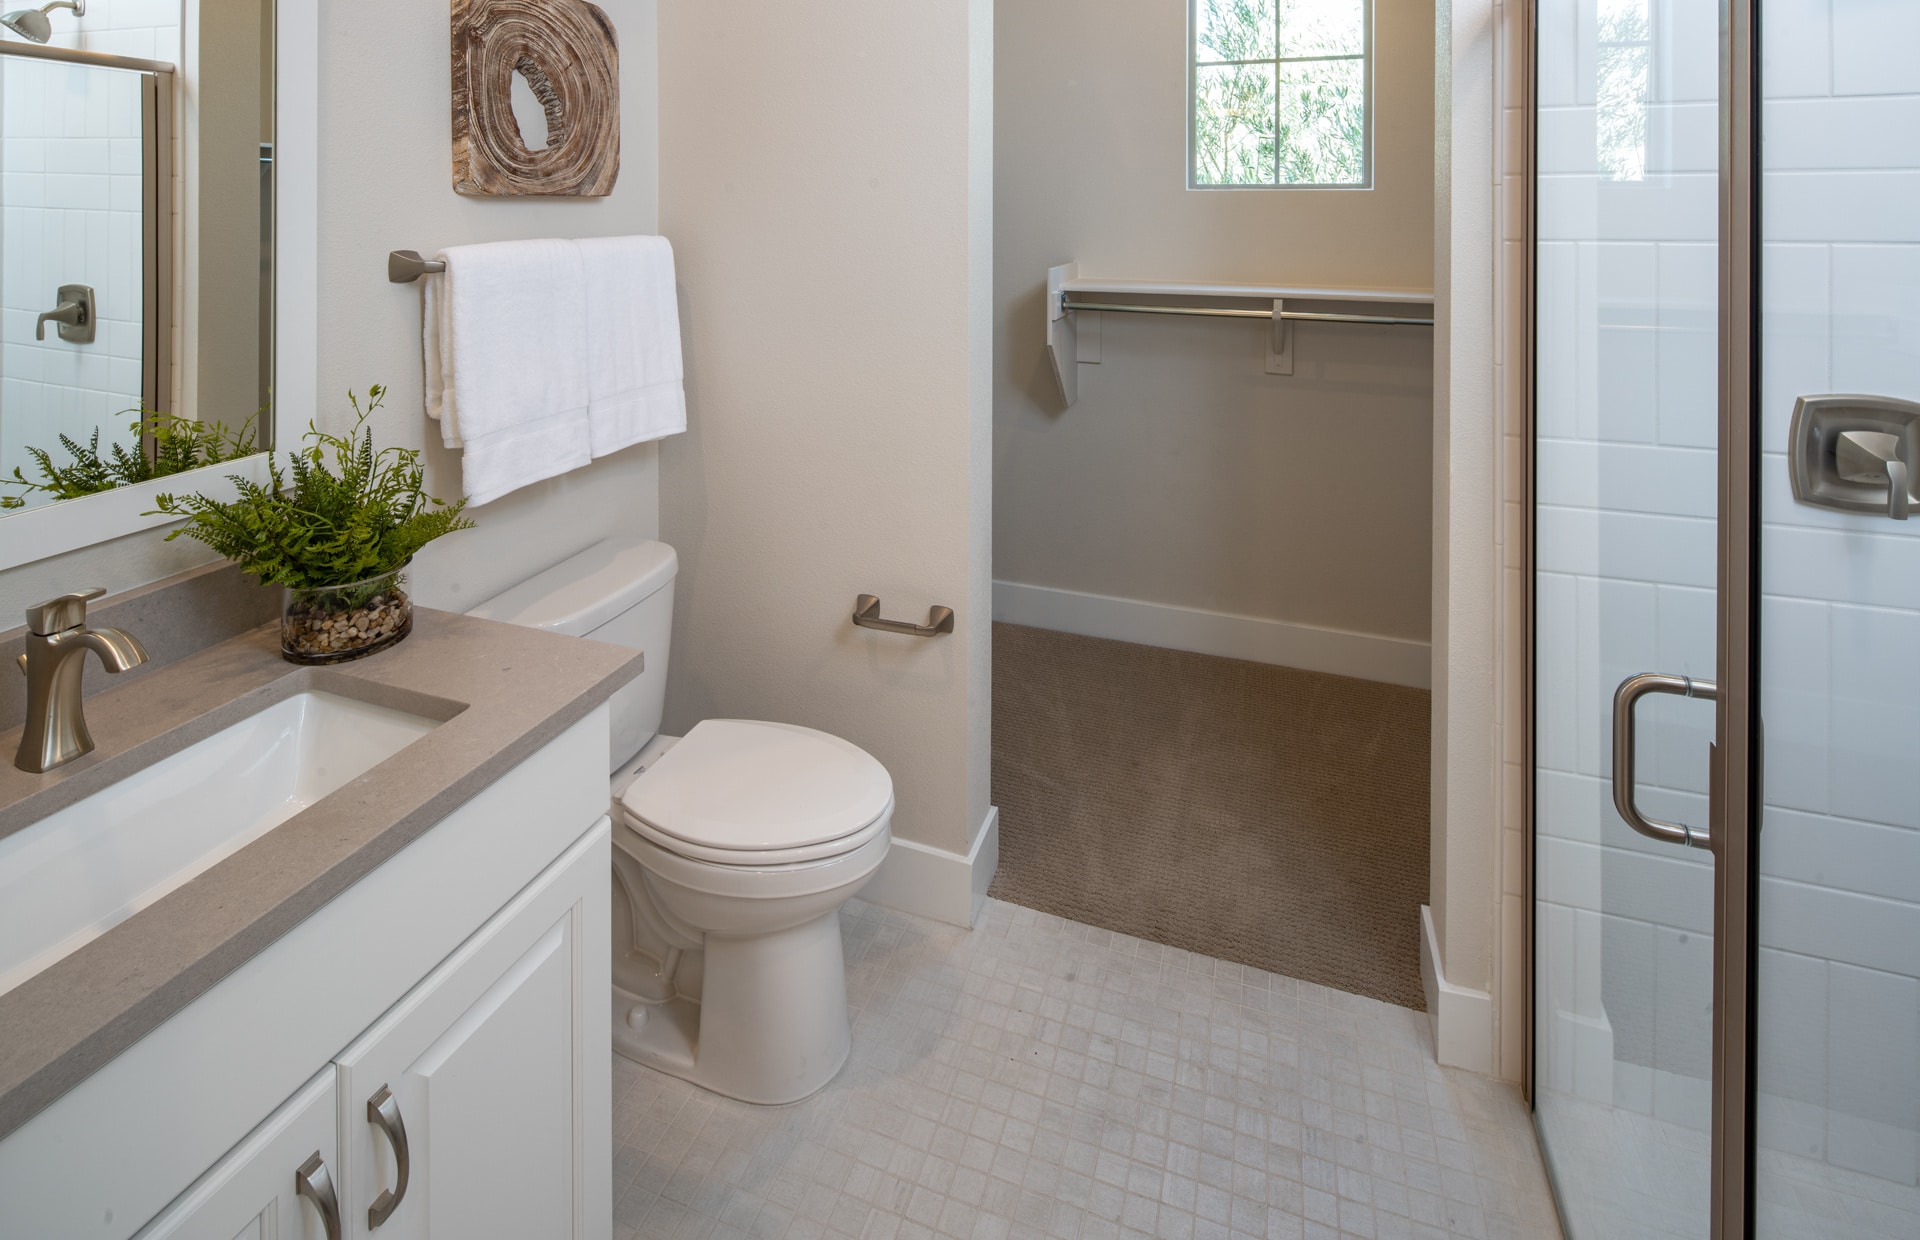 Bathroom of Cesena Model at Carmel Cliff by Pulte Homes